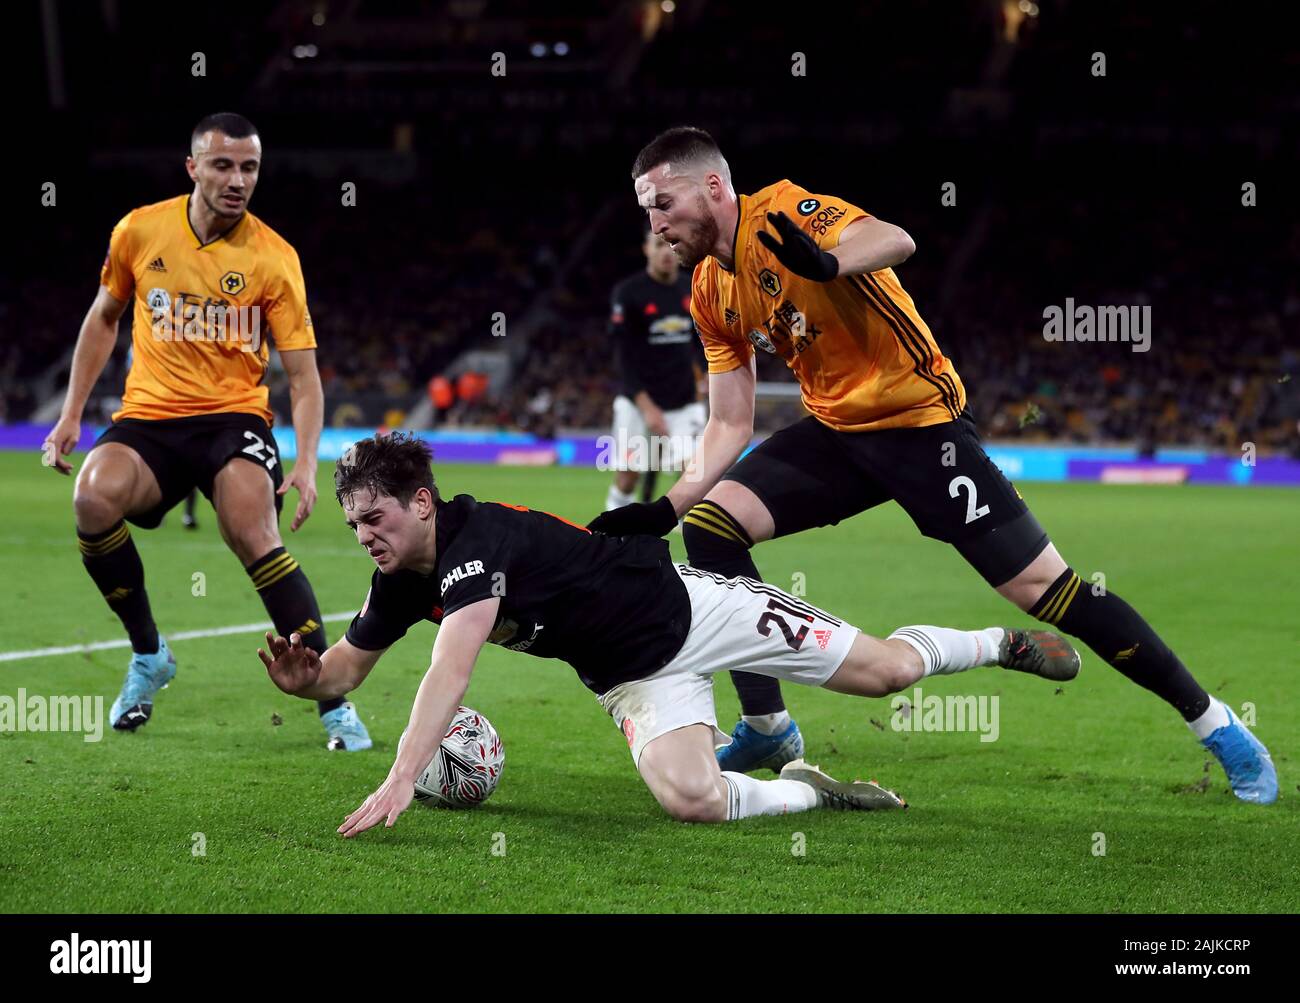 Manchester United's Daniel James (left) and Wolverhampton Wanderers' Matt  Doherty battle for the ball during the FA Cup third round match at Molineux  Stadium, Wolverhampton Stock Photo - Alamy